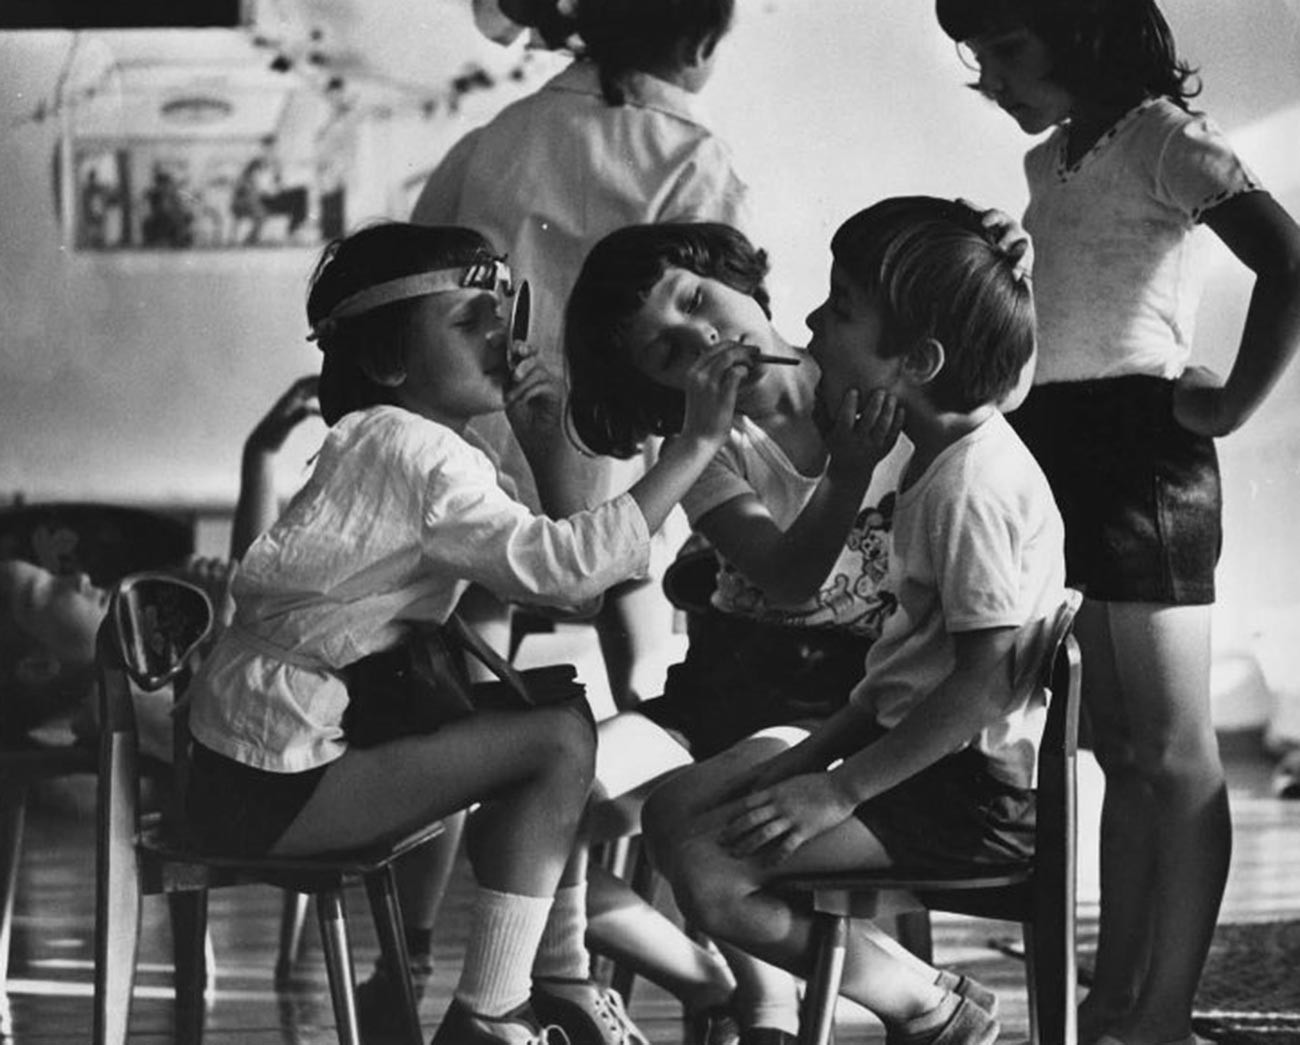 Playing at being dentists. Kindergarten, 1985  